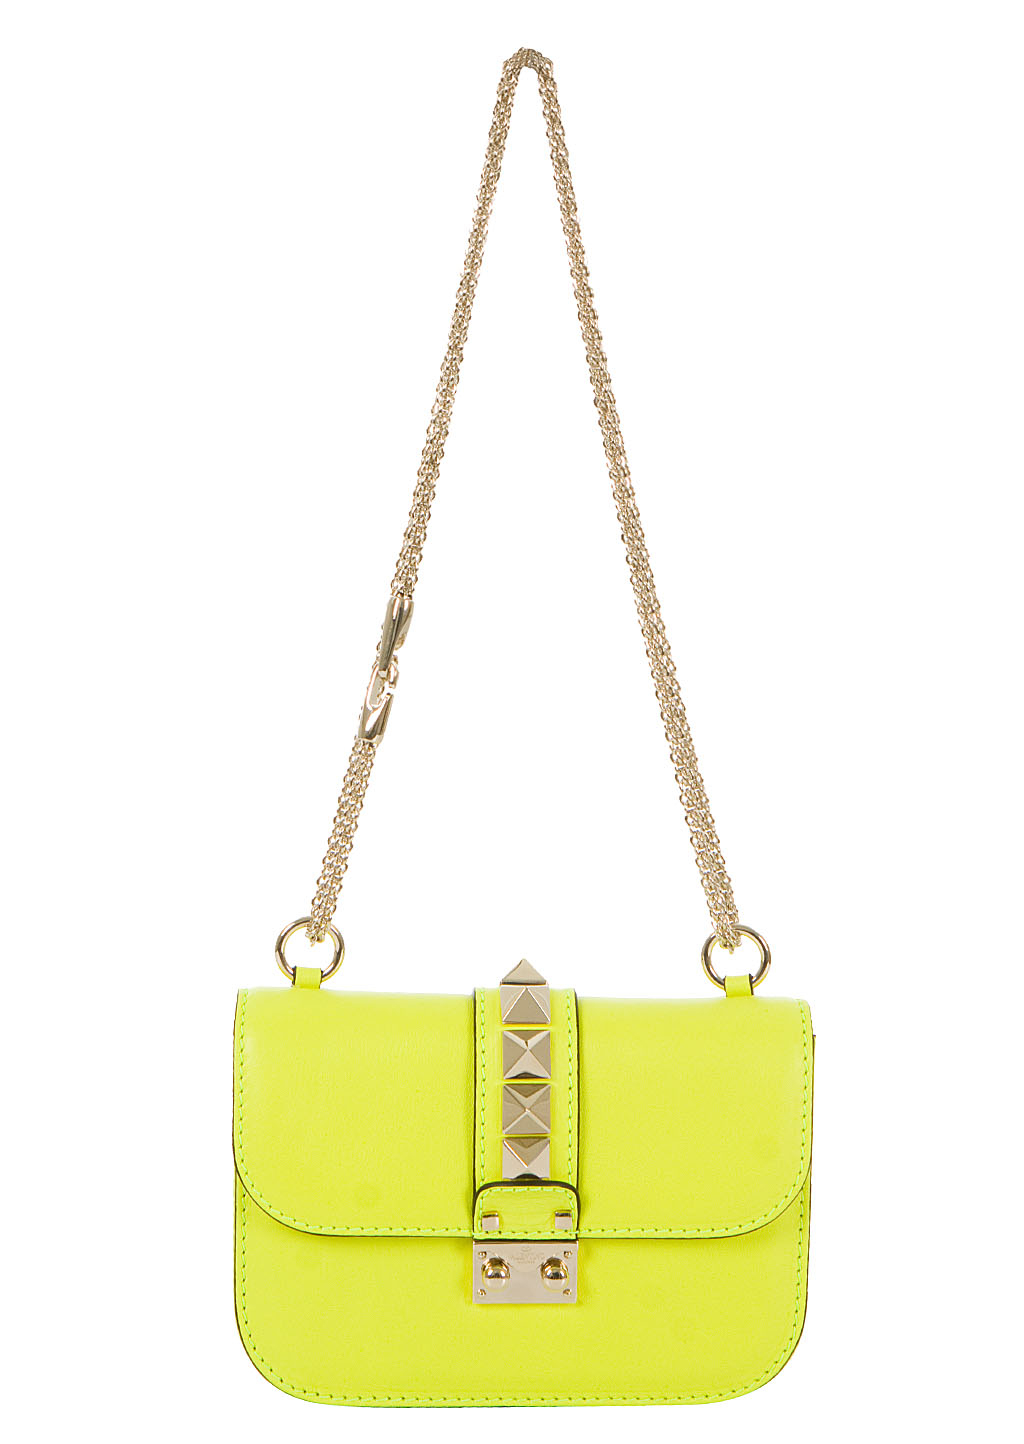 Valentino Yellow Neon Leather Shoulder Bag in Yellow | Lyst